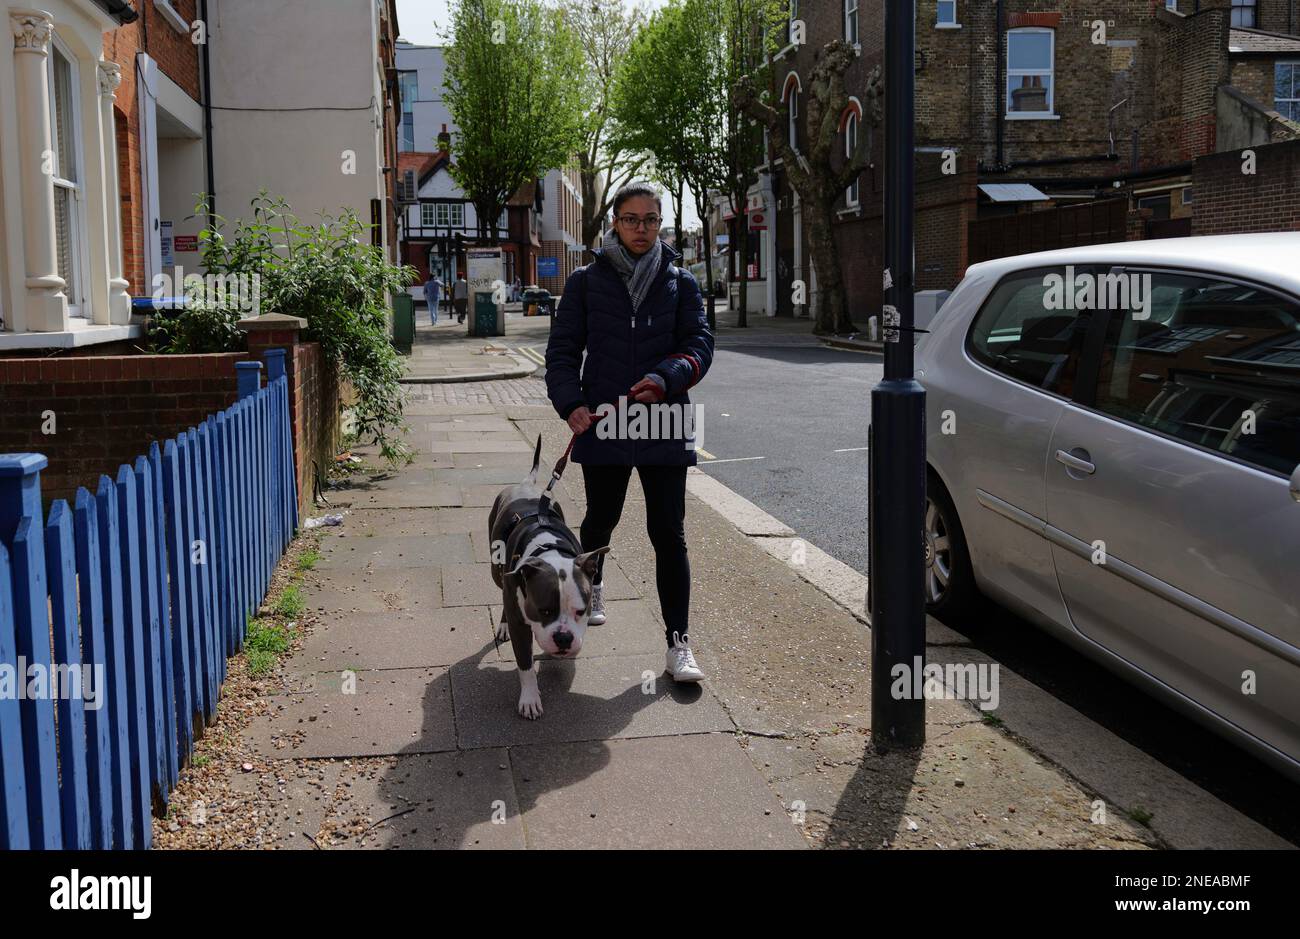 London - 04 18 2022: Woman walking her dog on Lechmere Rd in Willesden Stock Photo